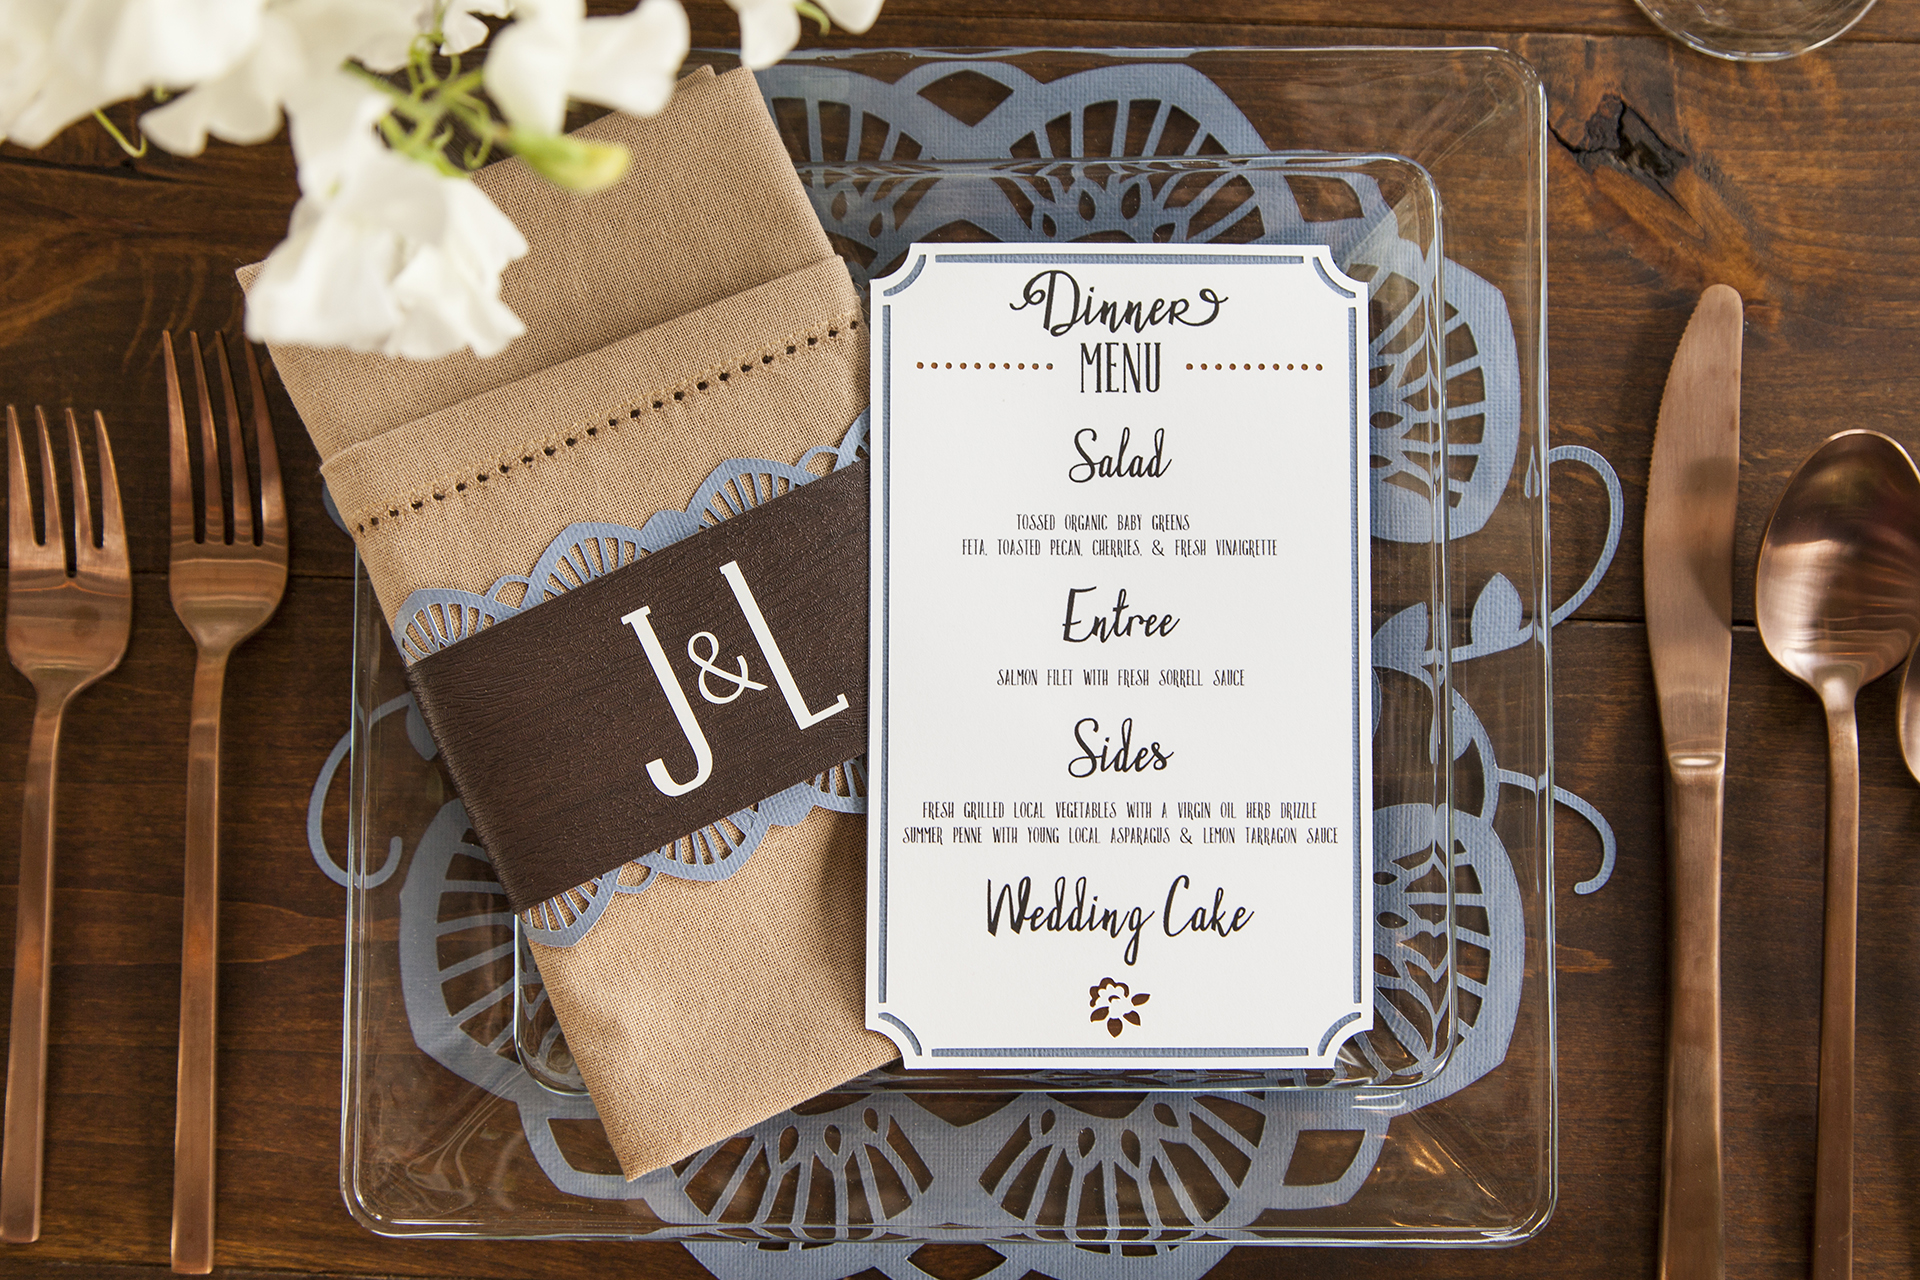 Wedding dinner menu on a clear plate with a lace cutout design on cardstock underneath